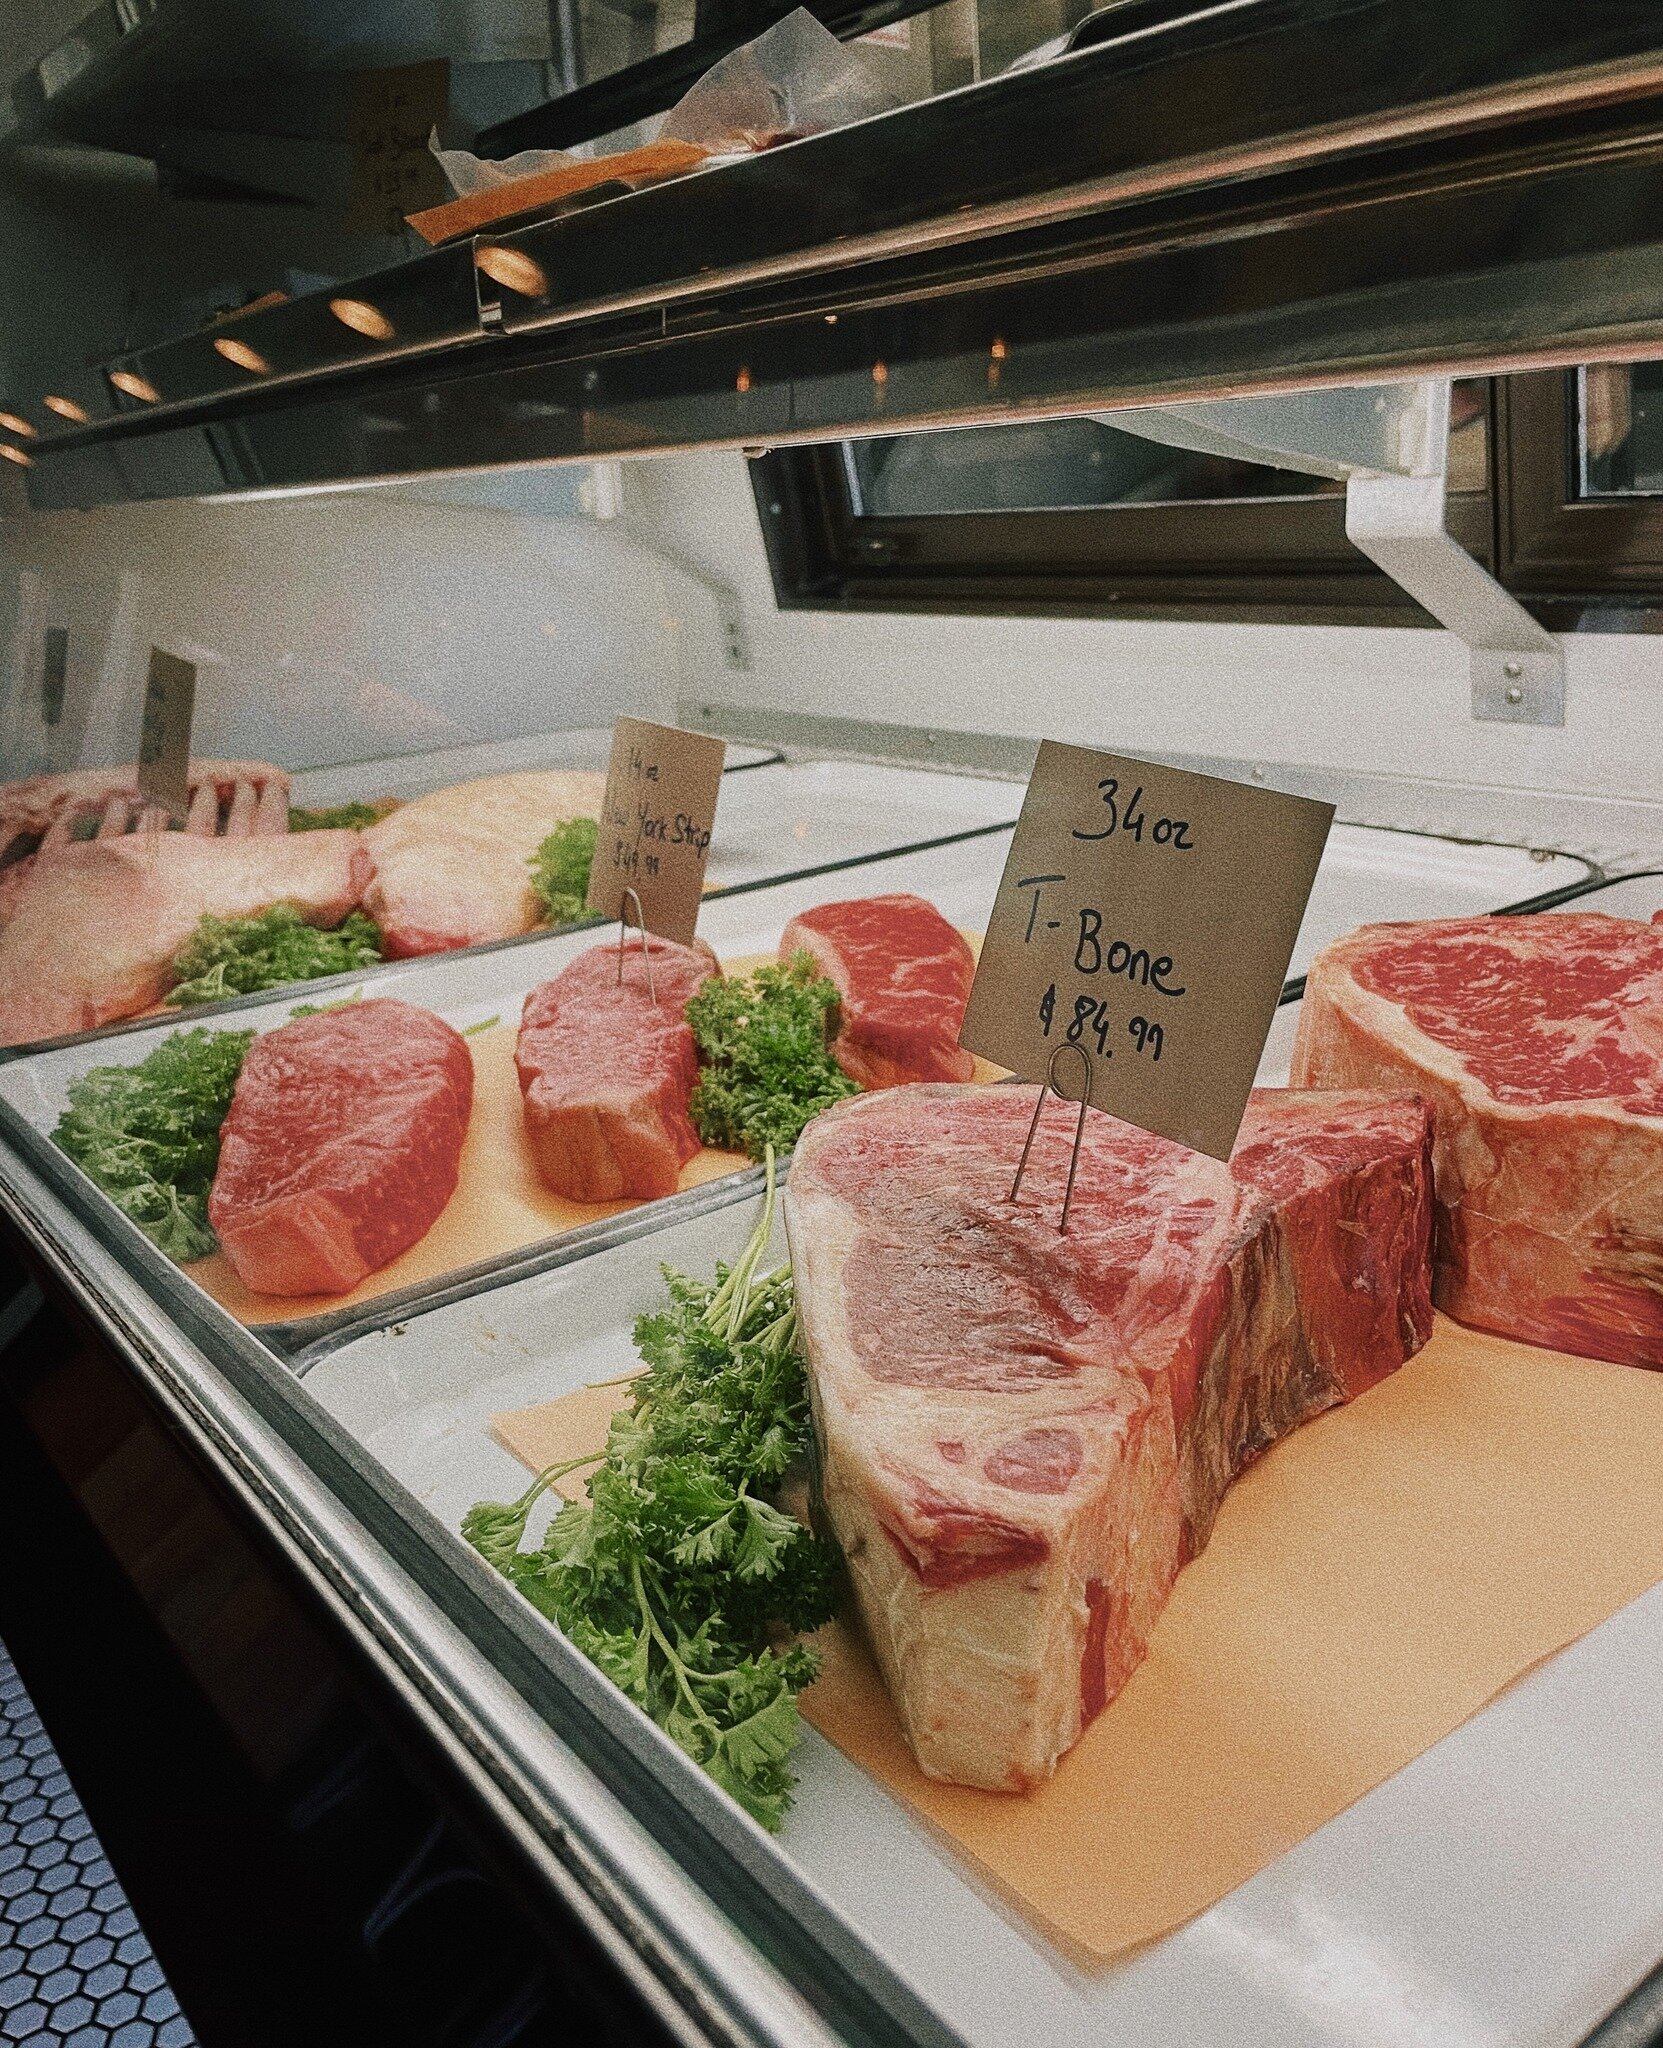 Just look at those meats! Our butcher case is available for shopping 24/7 during service, and you can now place orders for pick up via Toast. We've got everything from Chicken Liver Mousse to T-Bones🥩! Be the star of your next dinner party ⭐️
#boeuf